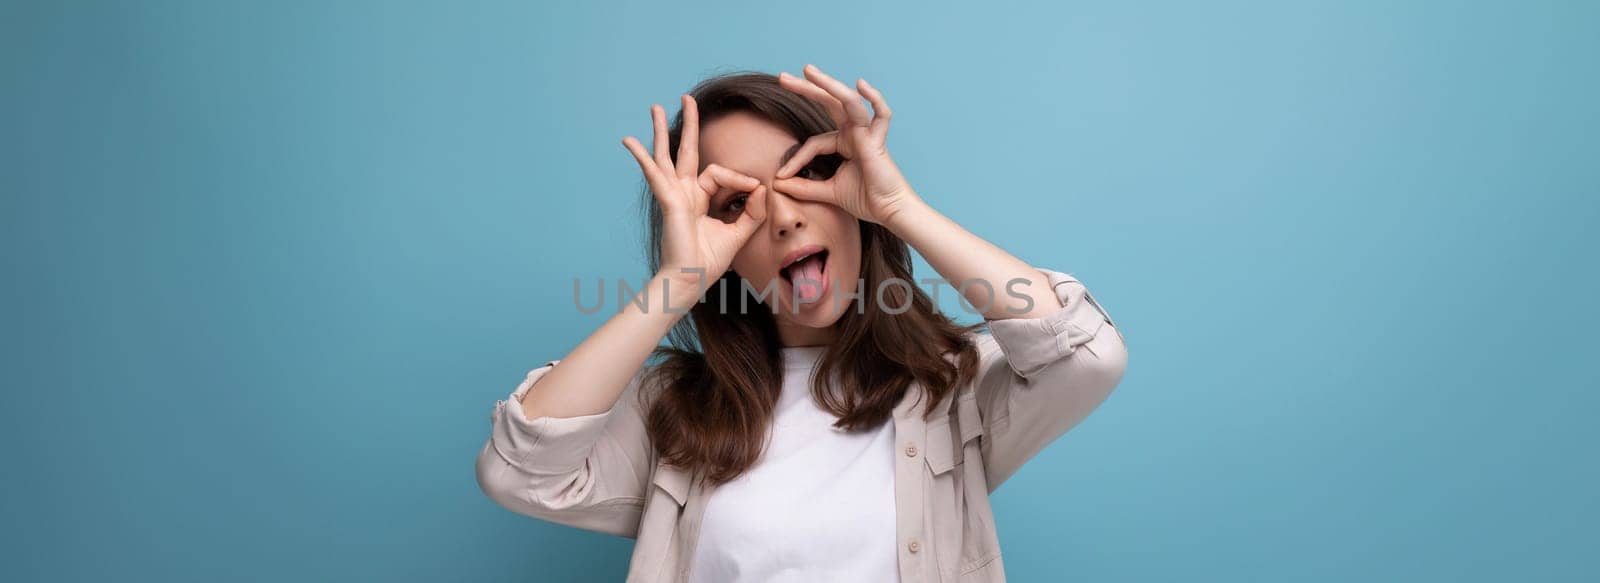 panoramic photo of a joyful cheerful brunette young female adult in a shirt and jeans on a background with copy space by TRMK